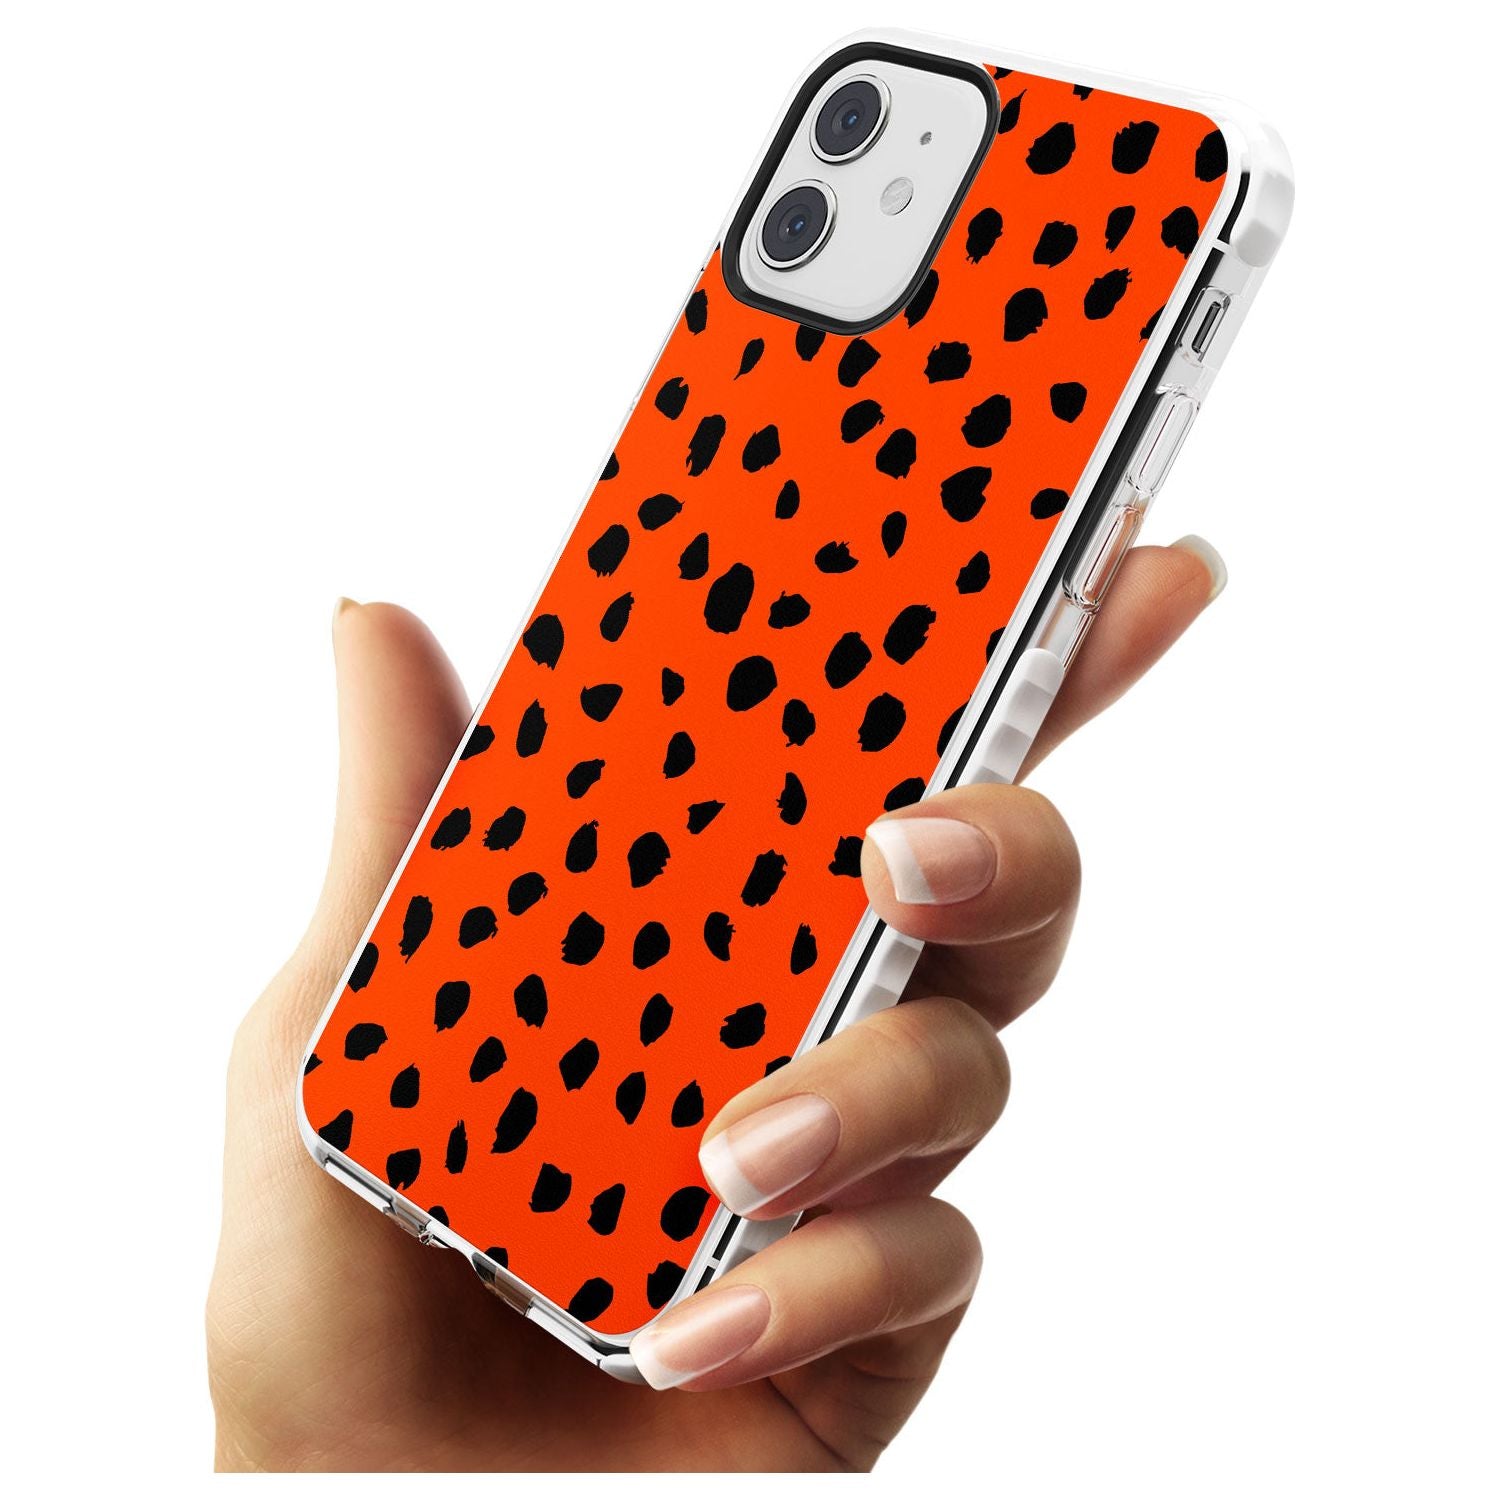 Black & Bright Red Dalmatian Polka Dot Spots Impact Phone Case for iPhone 11